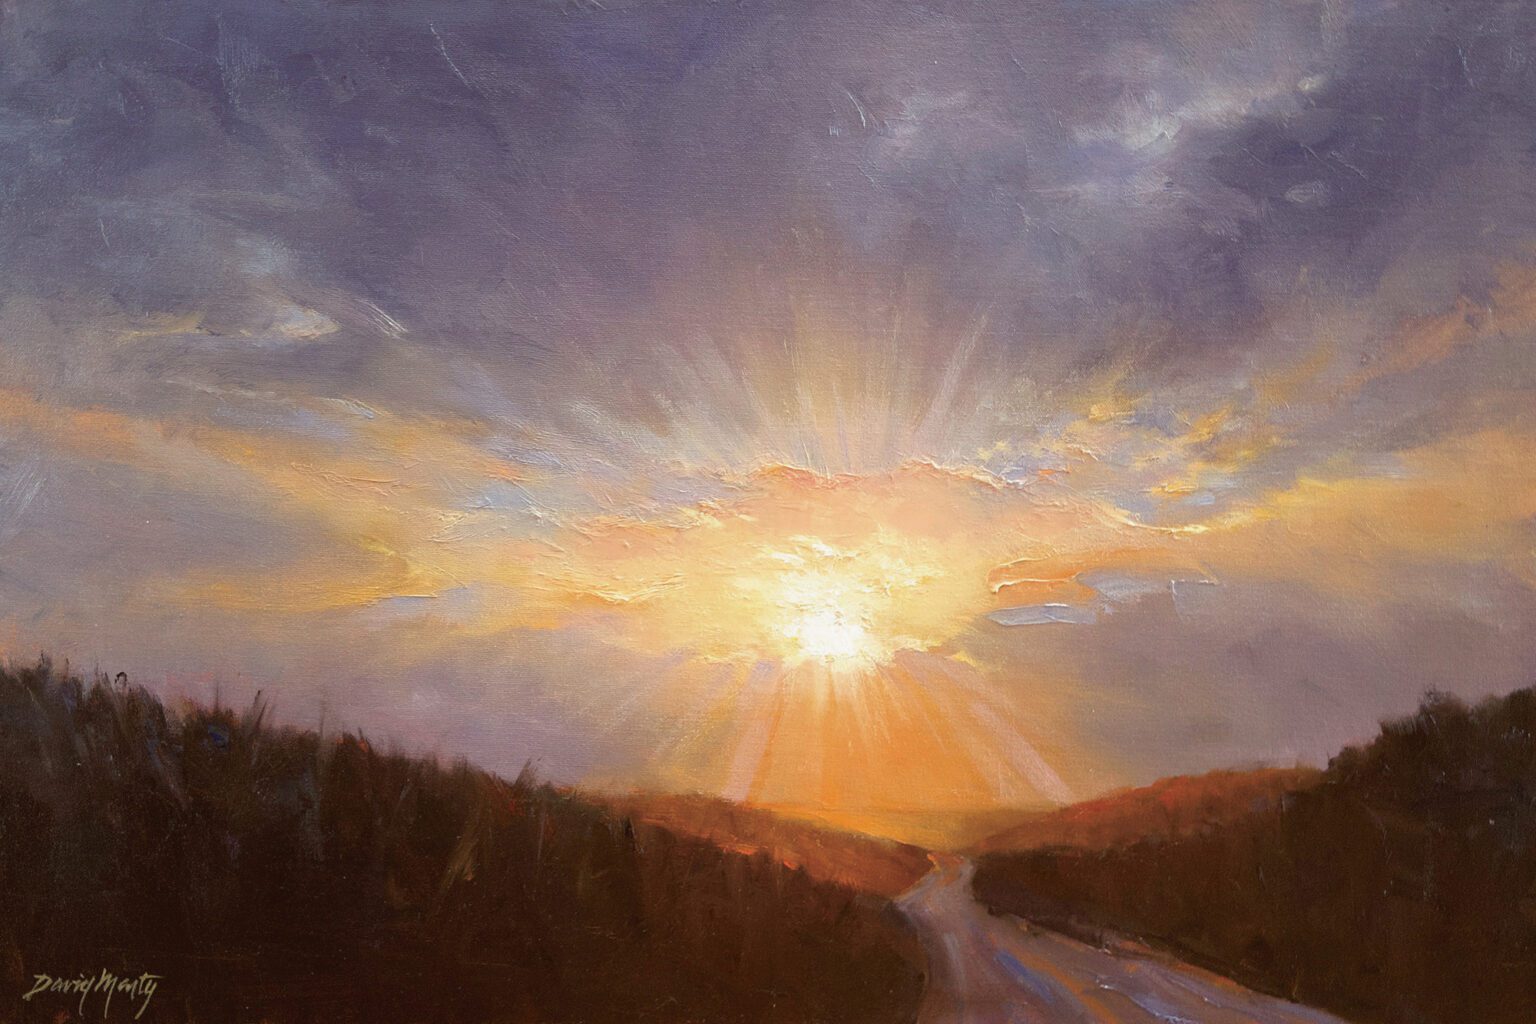 “Good Morning” by David Marty can be viewed at an opening reception for an exhibit of new landscape oils by Marty